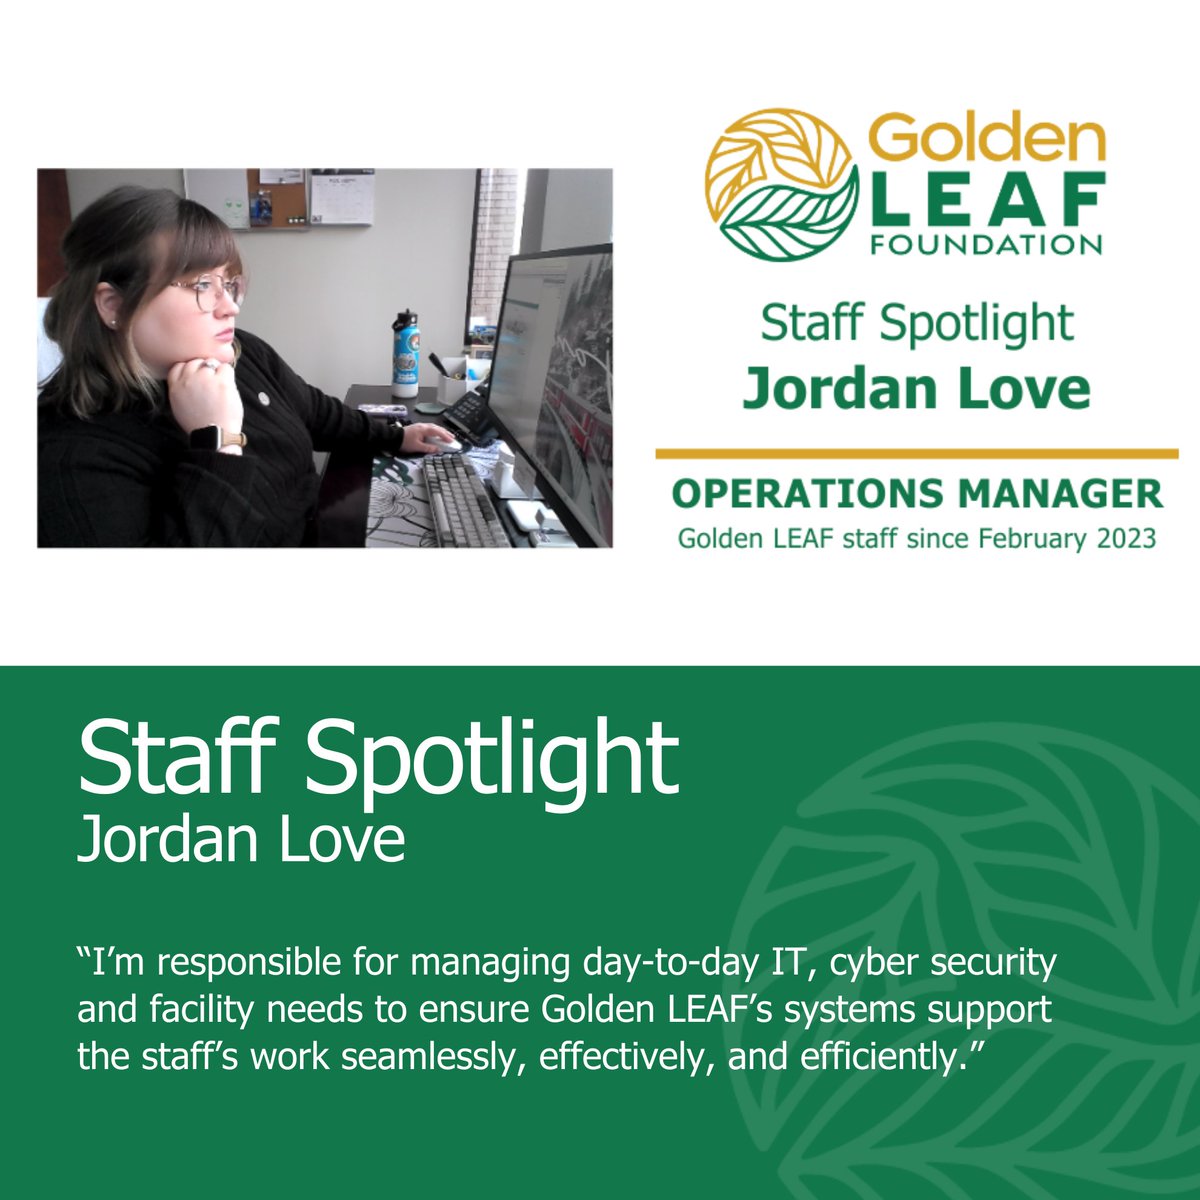 Meet Operations Manager Jordan Love 'I take great satisfaction in supporting an organization committed to supporting alternative economic activities that can diversify income sources and contribute to the overall well-being of these communities.' goldenleaf.org/news/staff-spo…